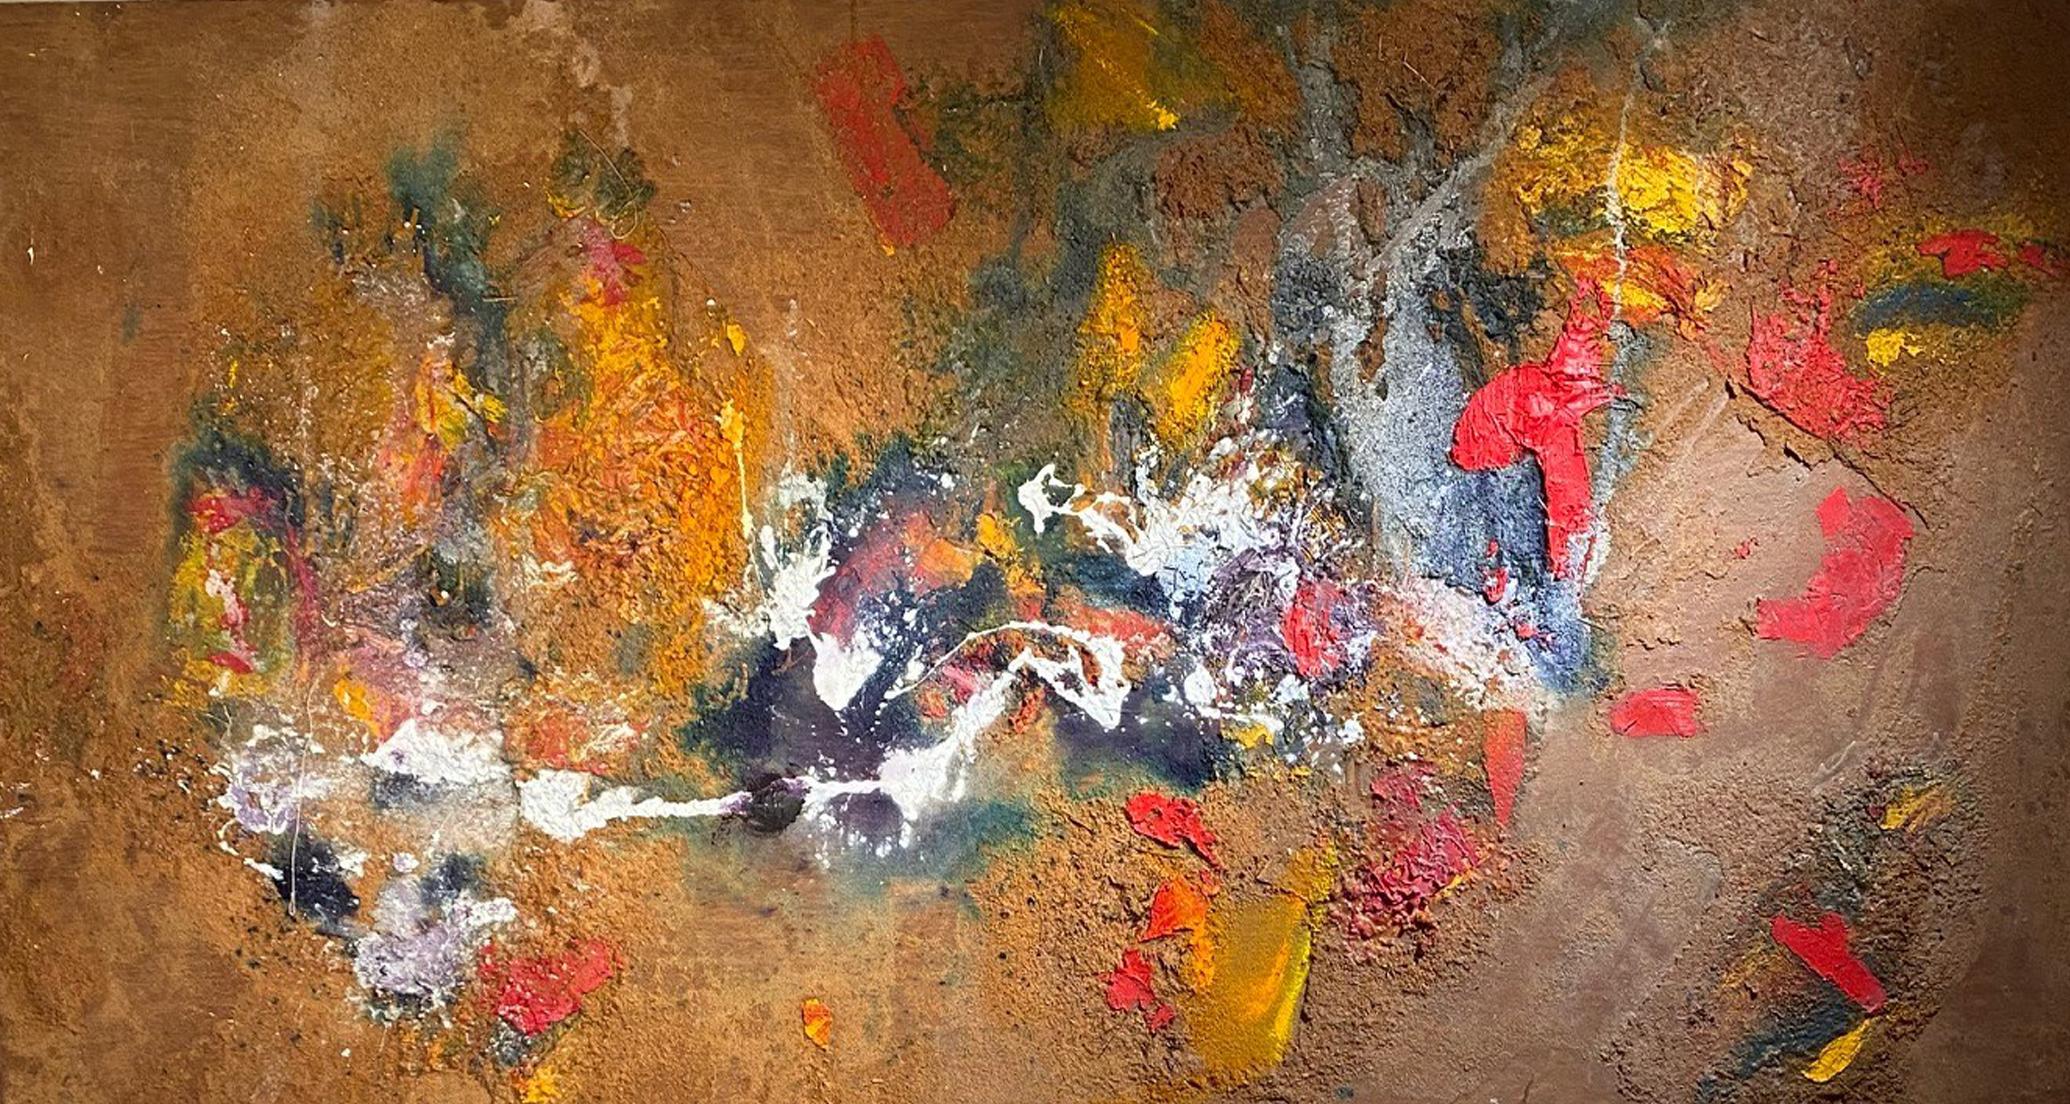 Steven H. Rehfeld Abstract Painting - "Birds And Bees" oil saw dust and foam on wood by Steven Rehfeld